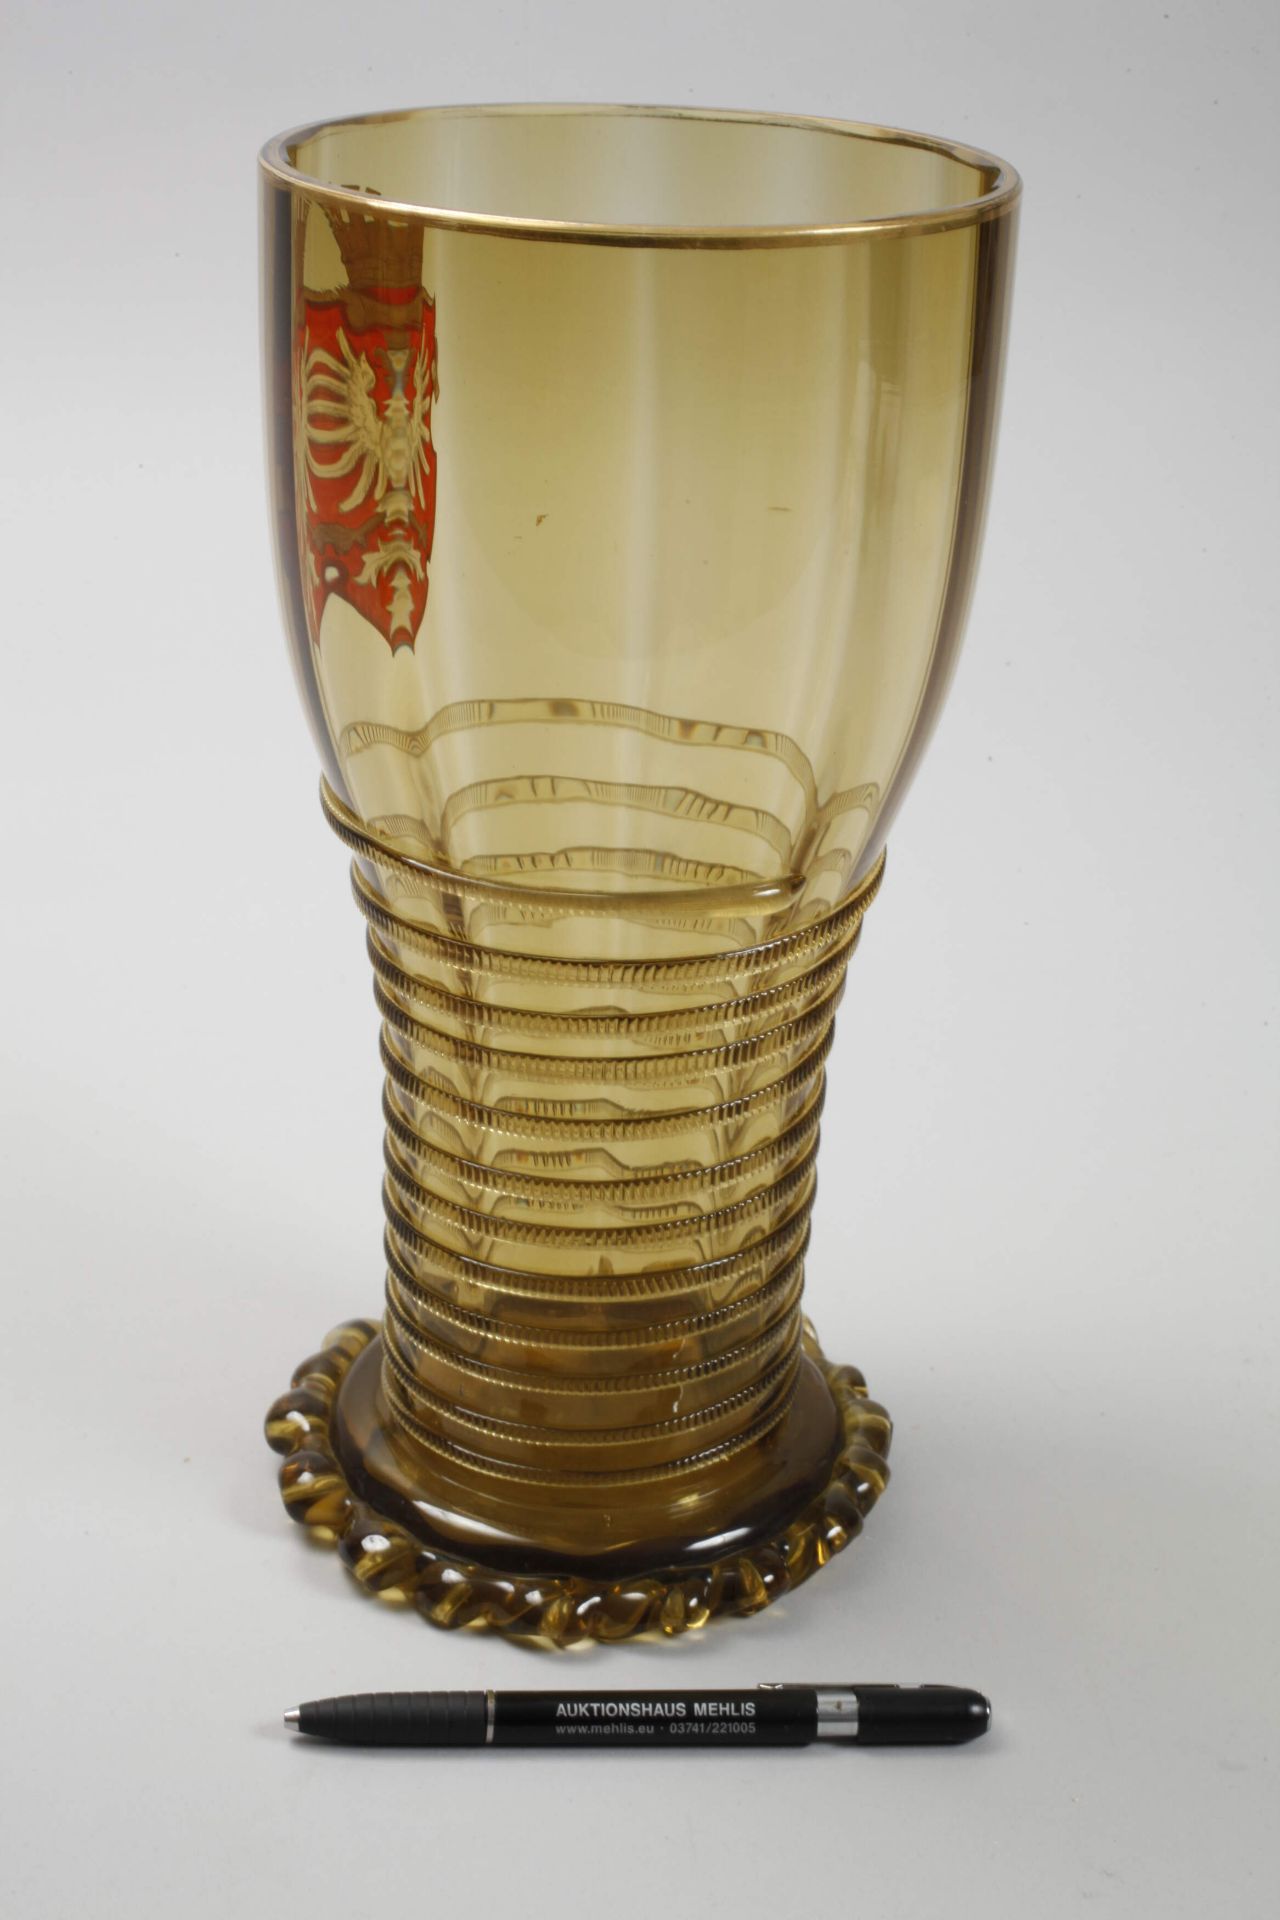 Pair of oversized coat of arms goblets - Image 2 of 4